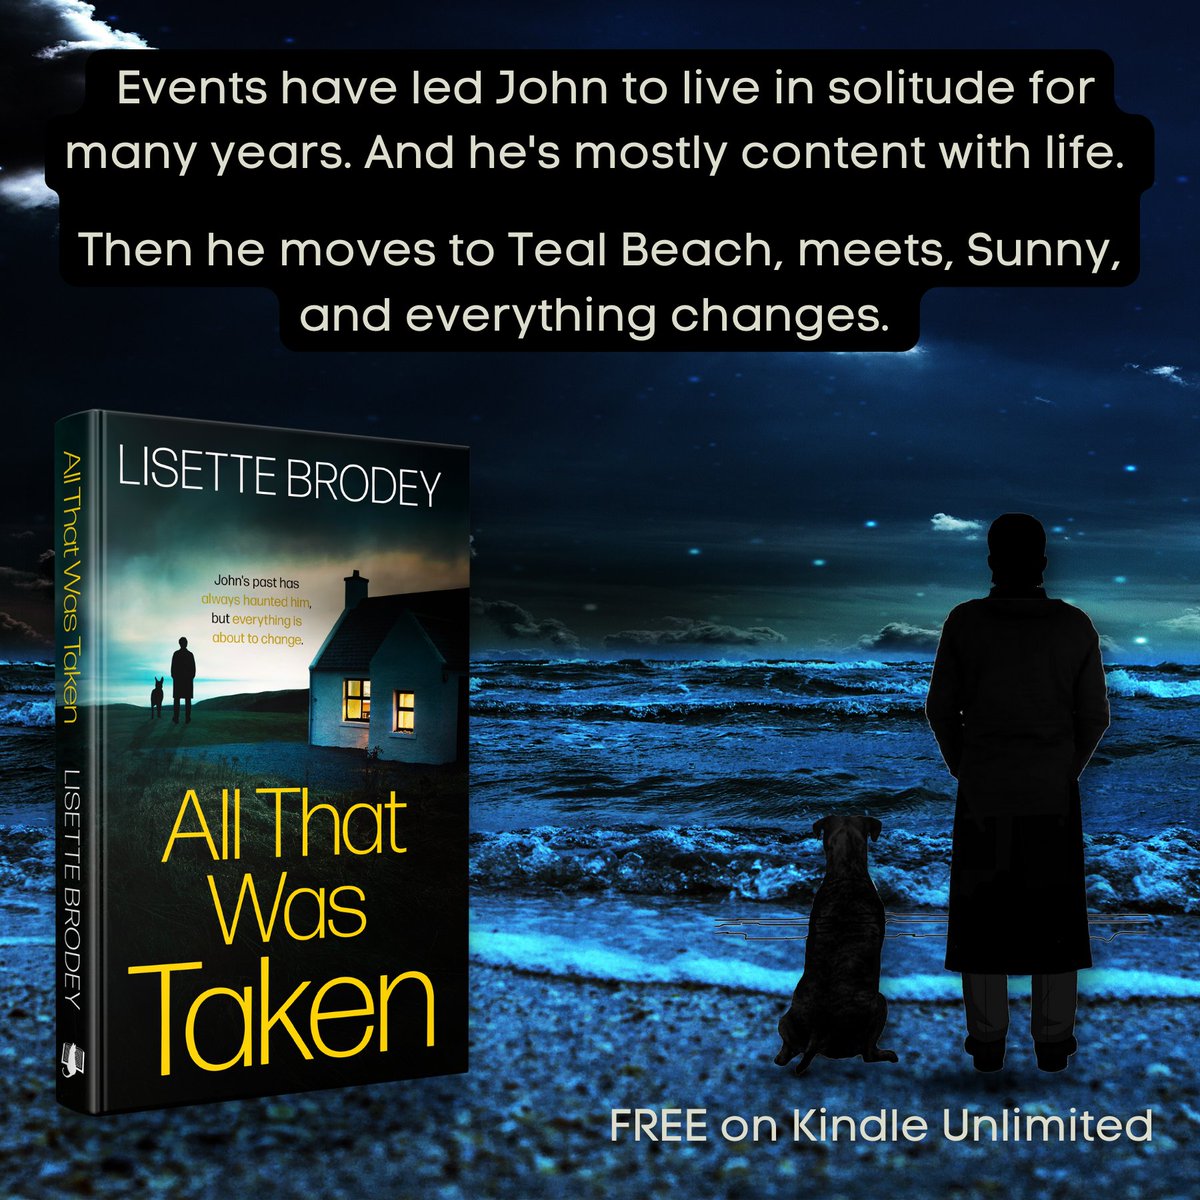 ALL THAT WAS TAKEN 🌊🌔 'It’s easy to understand why John Hennessey chooses to favour a life of near-solitude as his story unfolds in this psychologically charged #thriller.' Review mybook.to/ATWTaken ✨ #California 📘 #KindleUnlimited